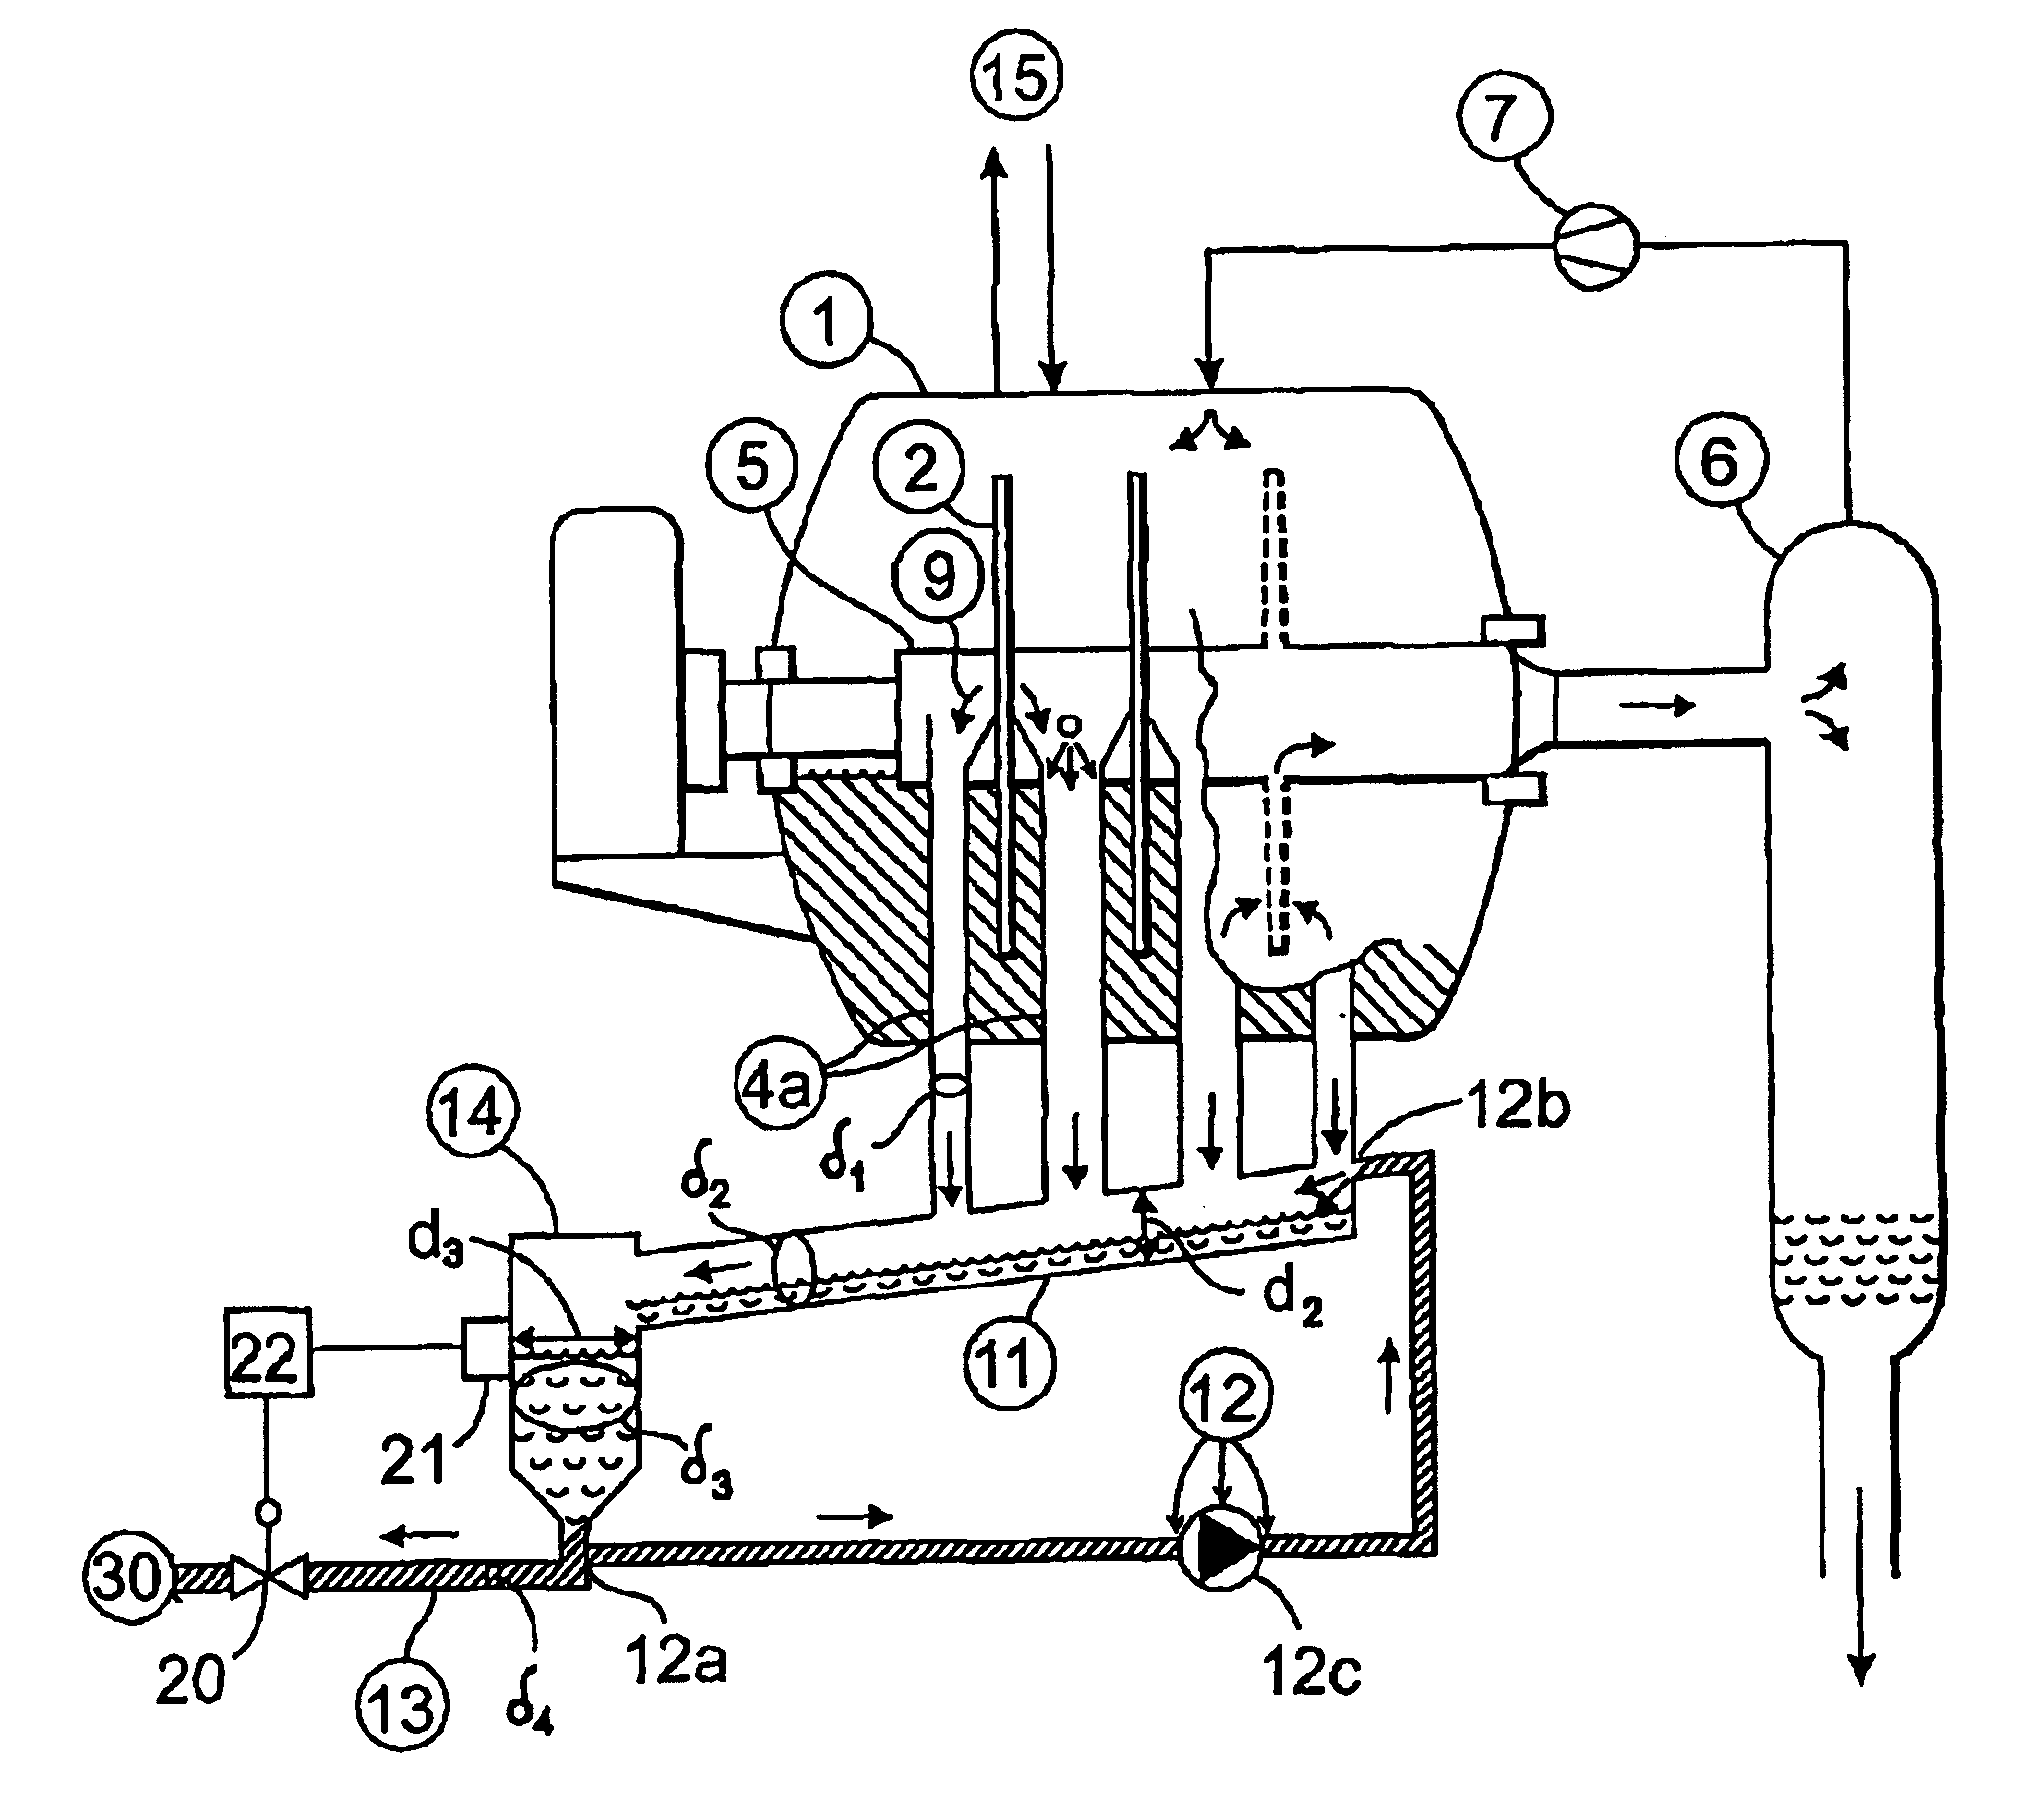 Pipe system for receiving and transporting lime sludge from a white liquor filter